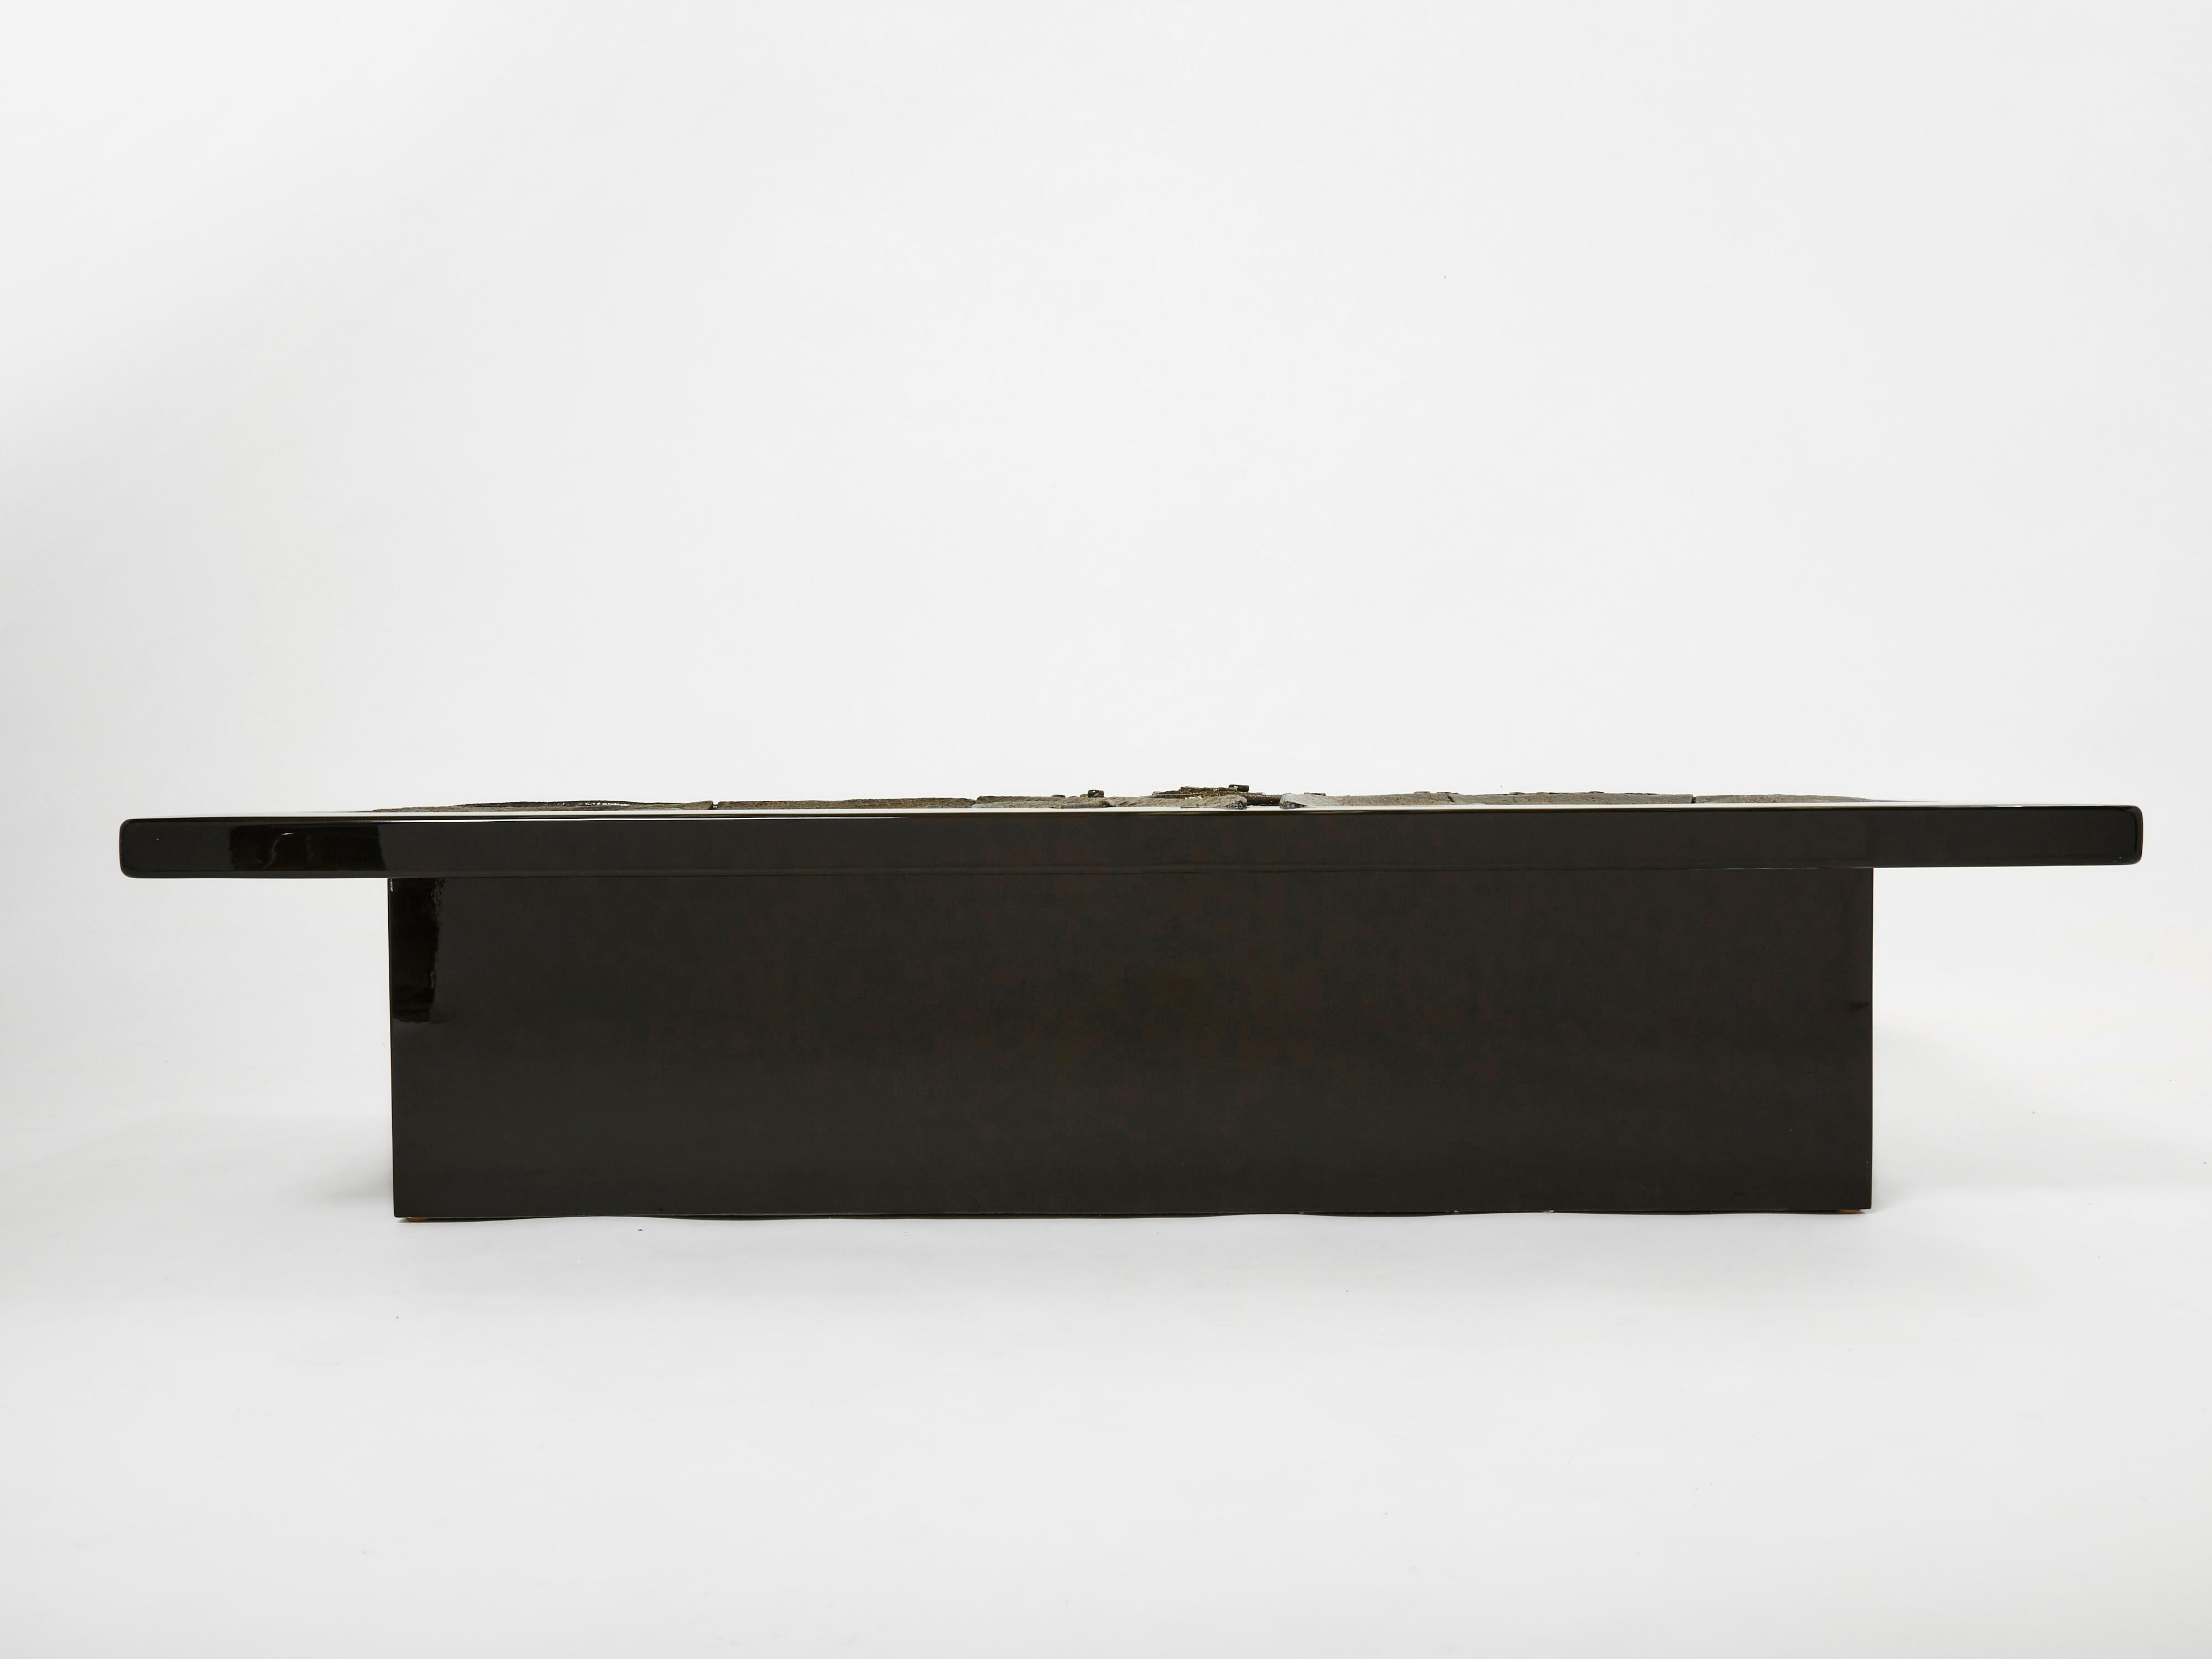 Late 20th Century Belgian Brutalist Ceramic Lacquer Coffee Table by Pia Manu 1970s For Sale